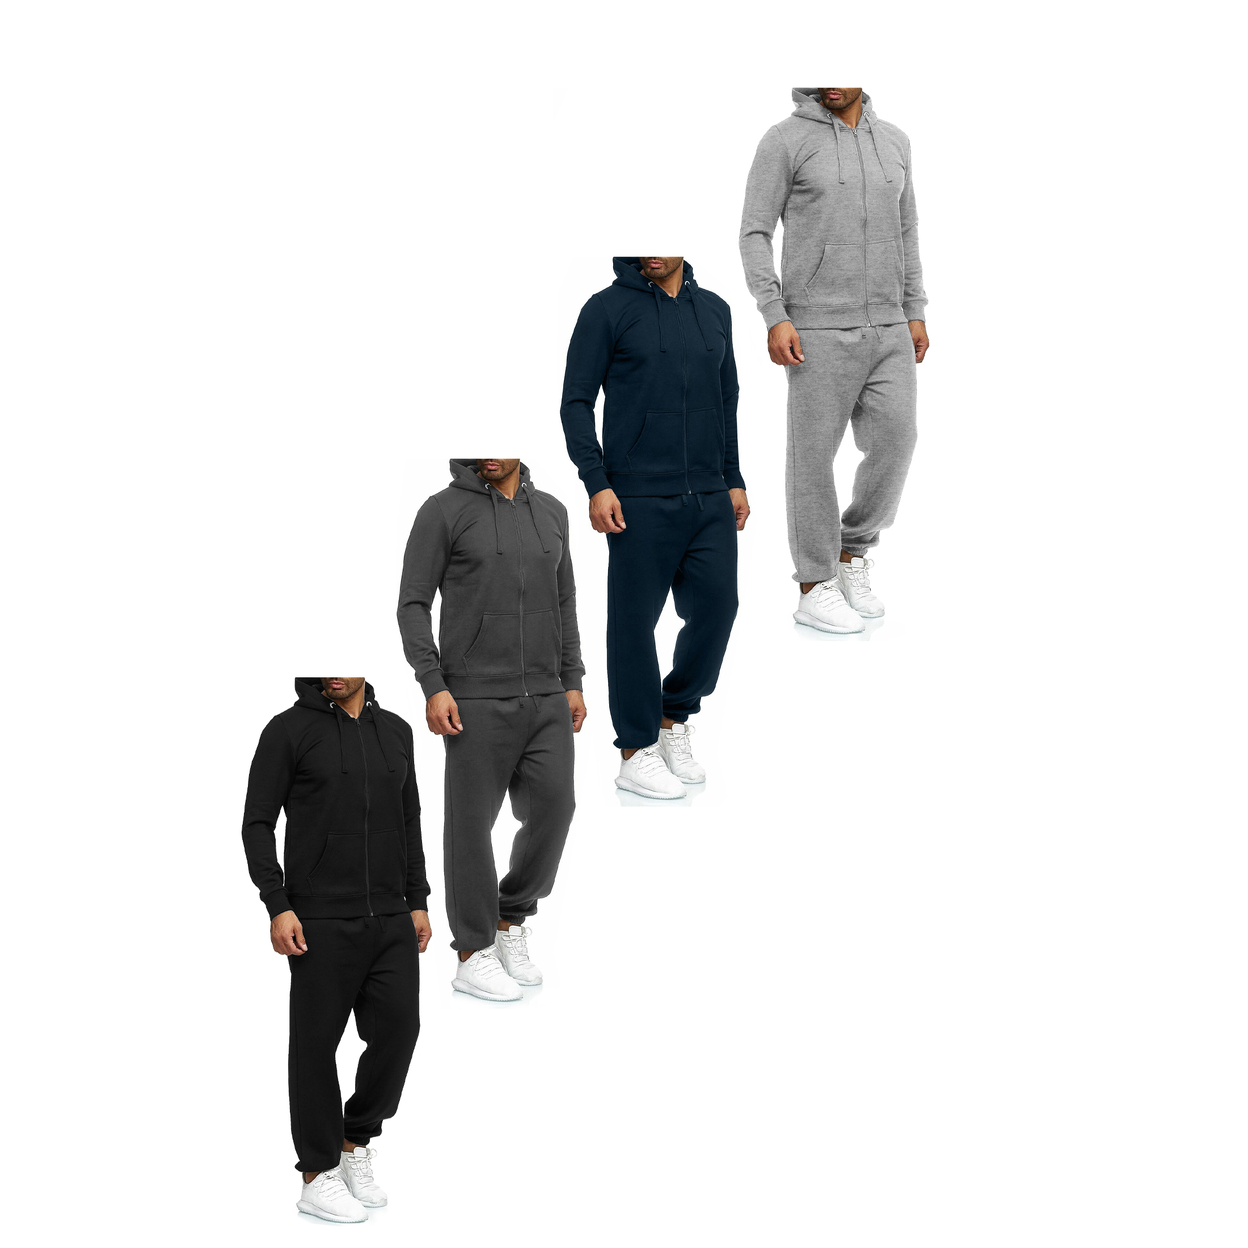 Multi-Pack: Men's Casual Big & Tall Athletic Active Winter Warm Fleece Lined Full Zip Tracksuit Jogger Set - Navy, 1-pack, 3xl